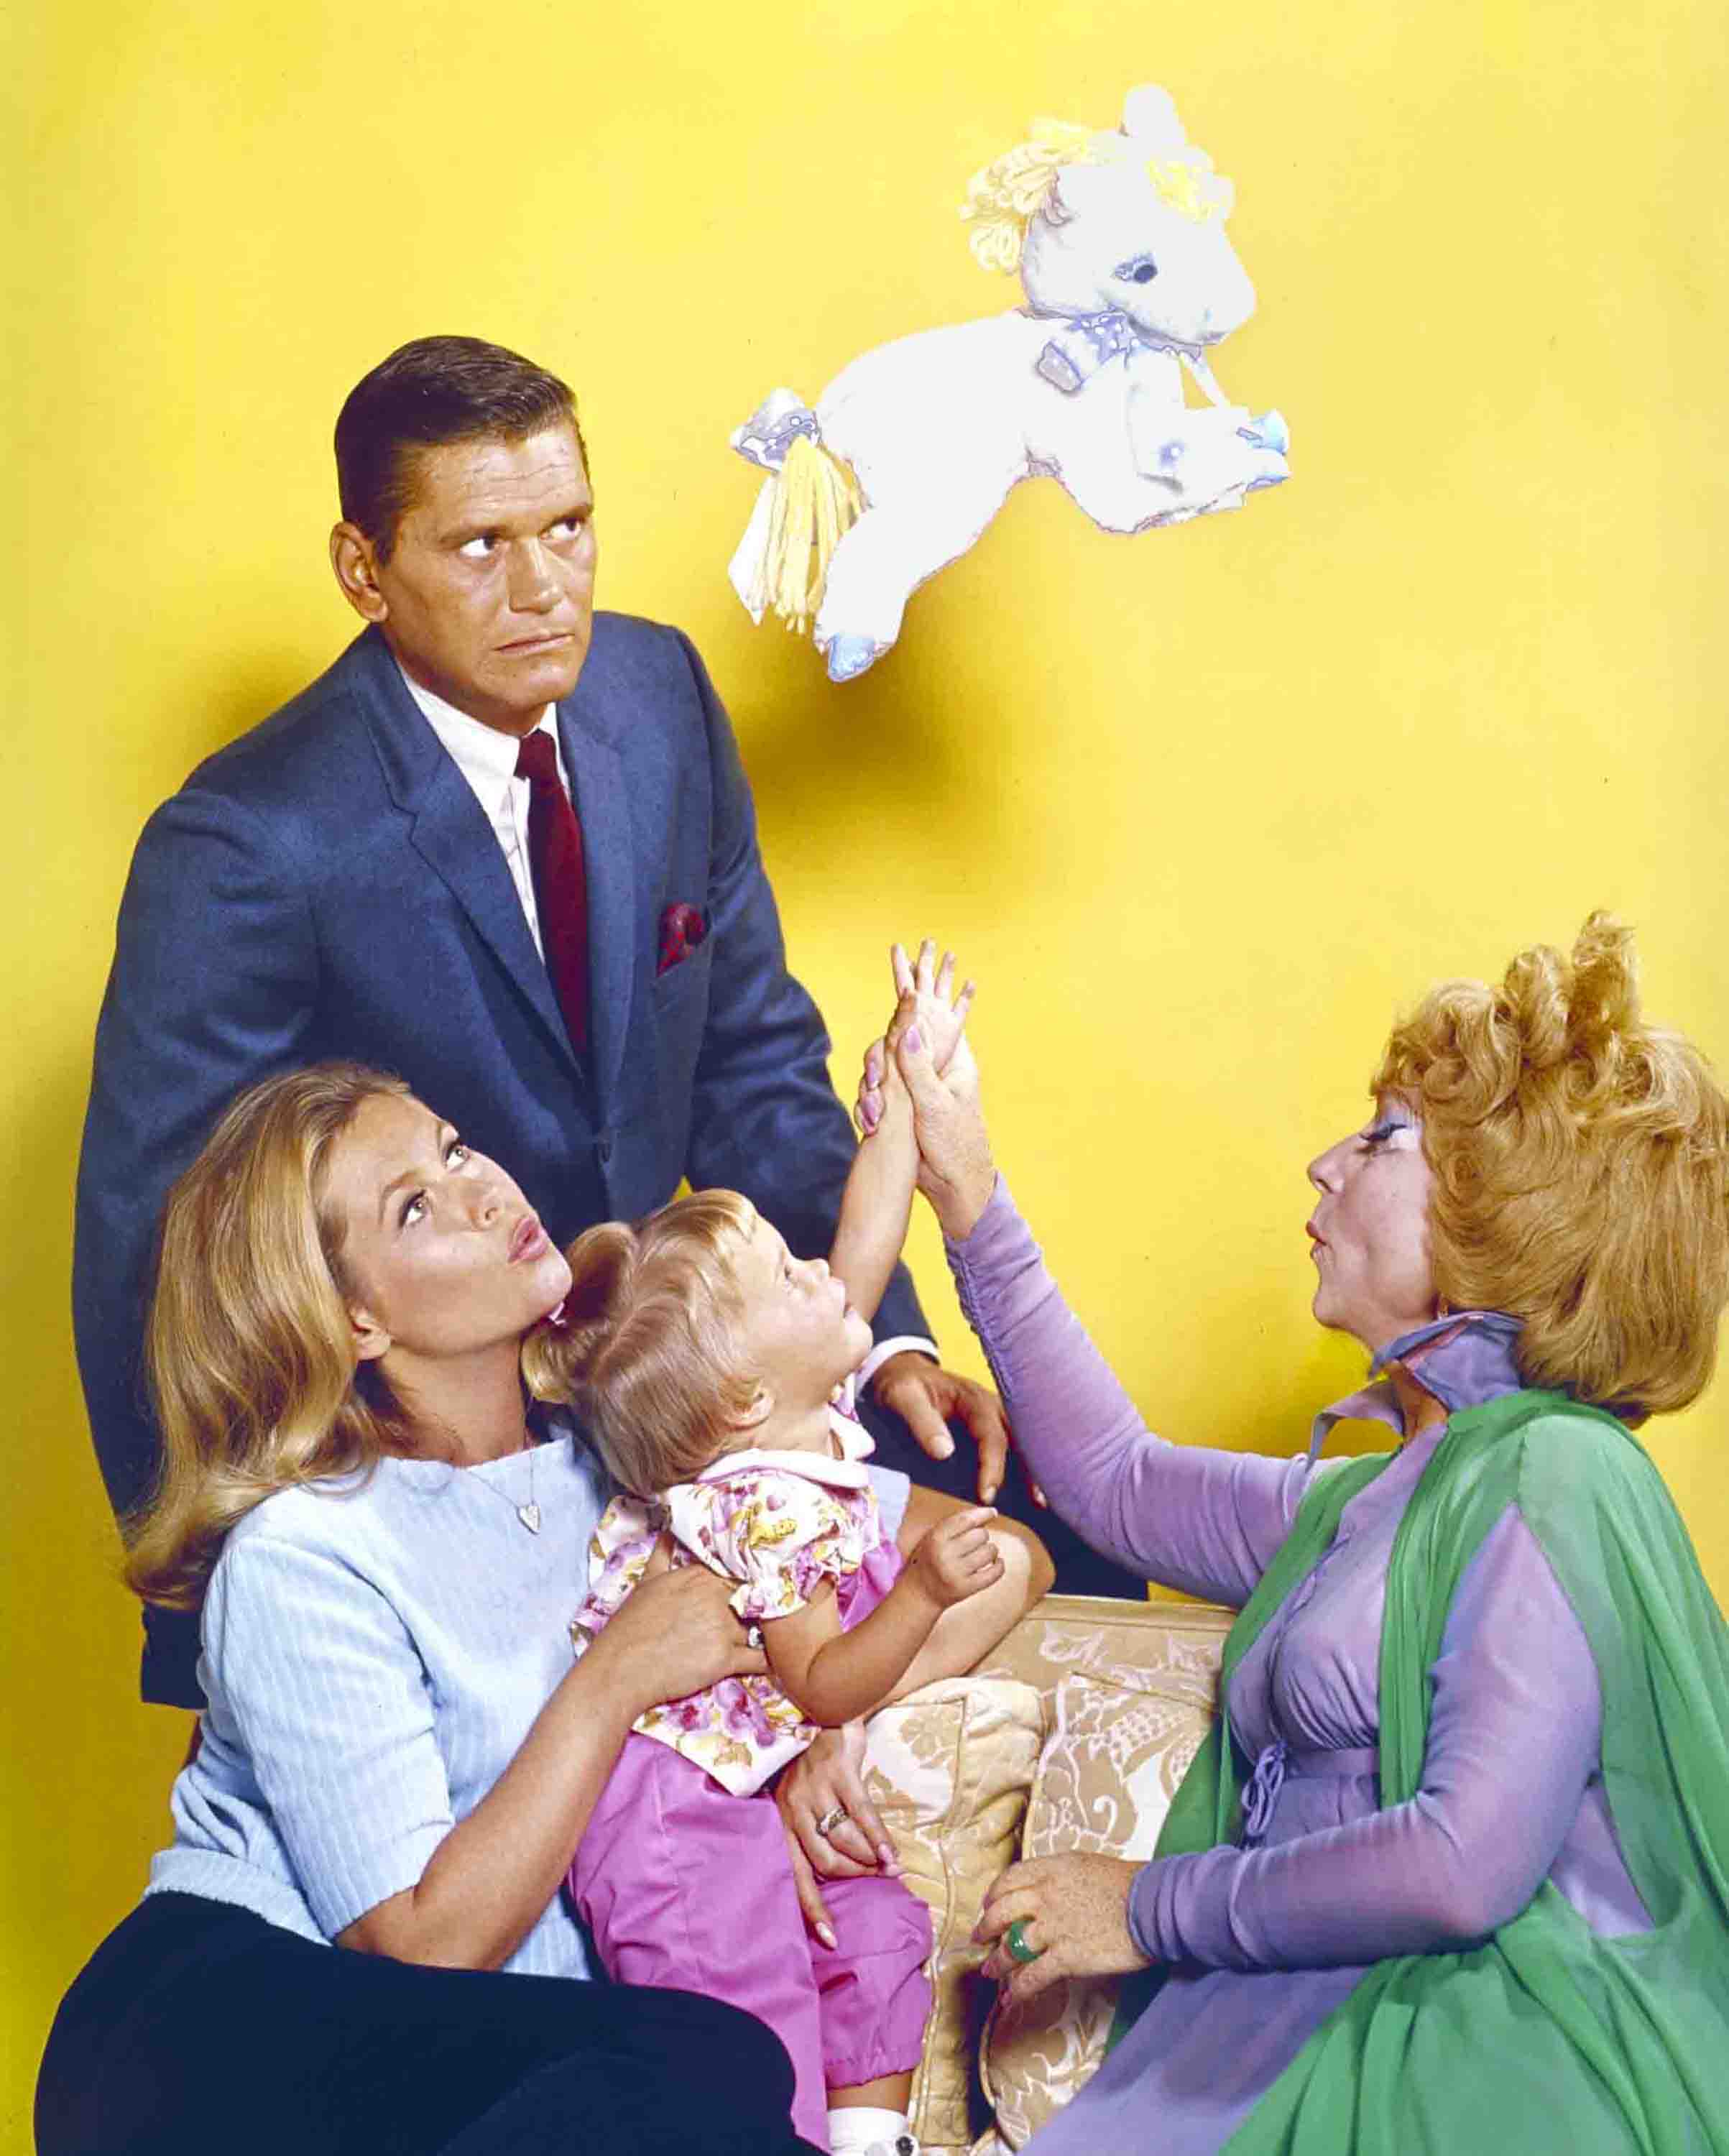 BEWITCHED: Dick York (Darrin), Elizabeth Montgomery (Samantha), Erin Murphy (Tabitha), Agnes Moorehead (Endora) (ABC Photo Archives/Getty Images)